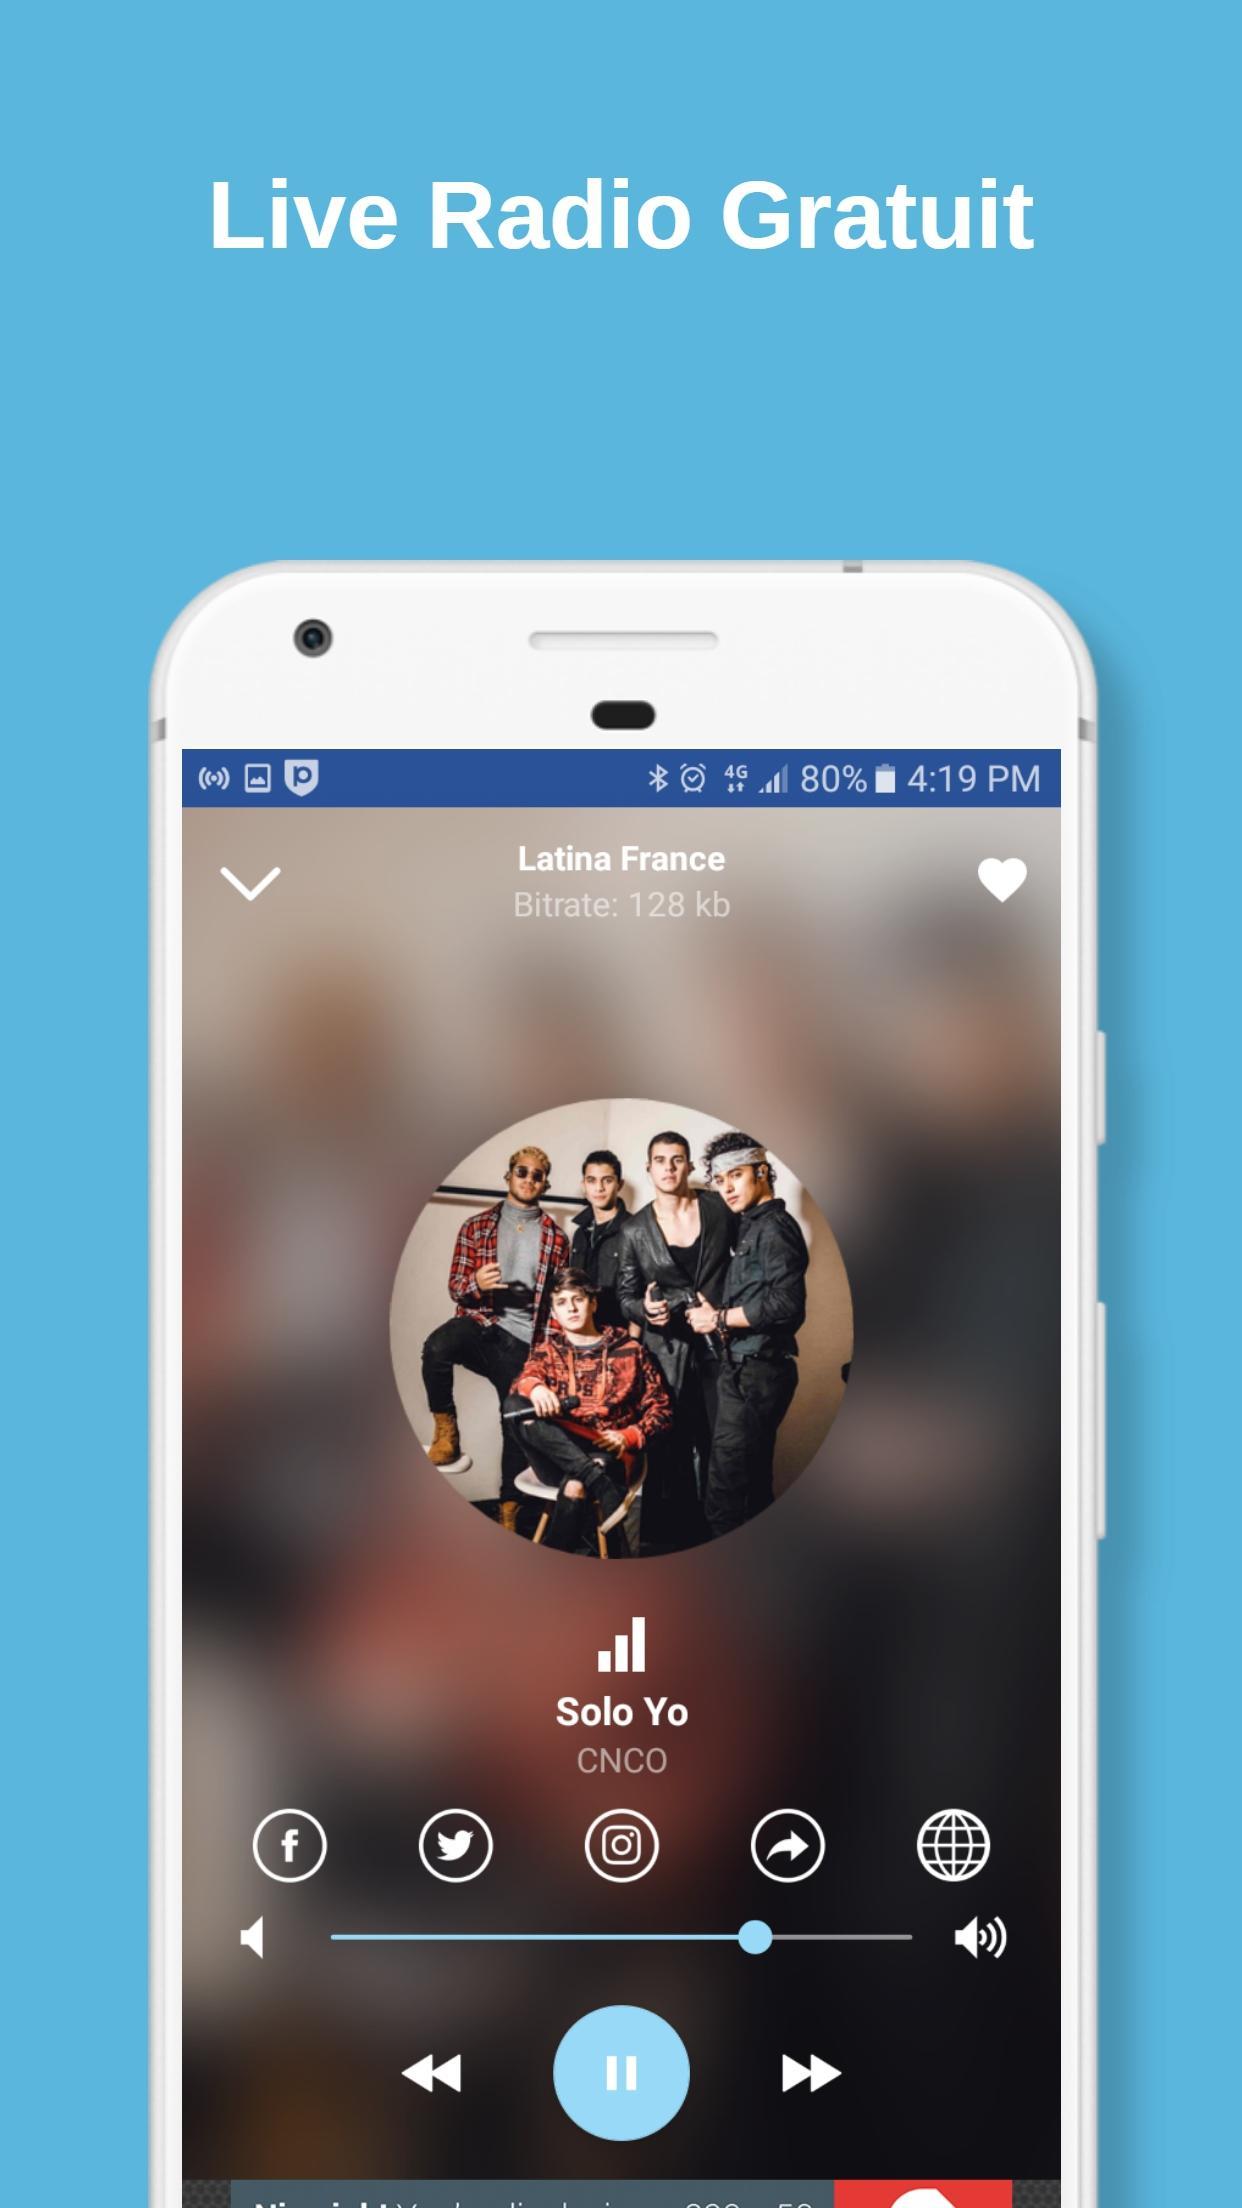 Radio NRJ France for Android - APK Download